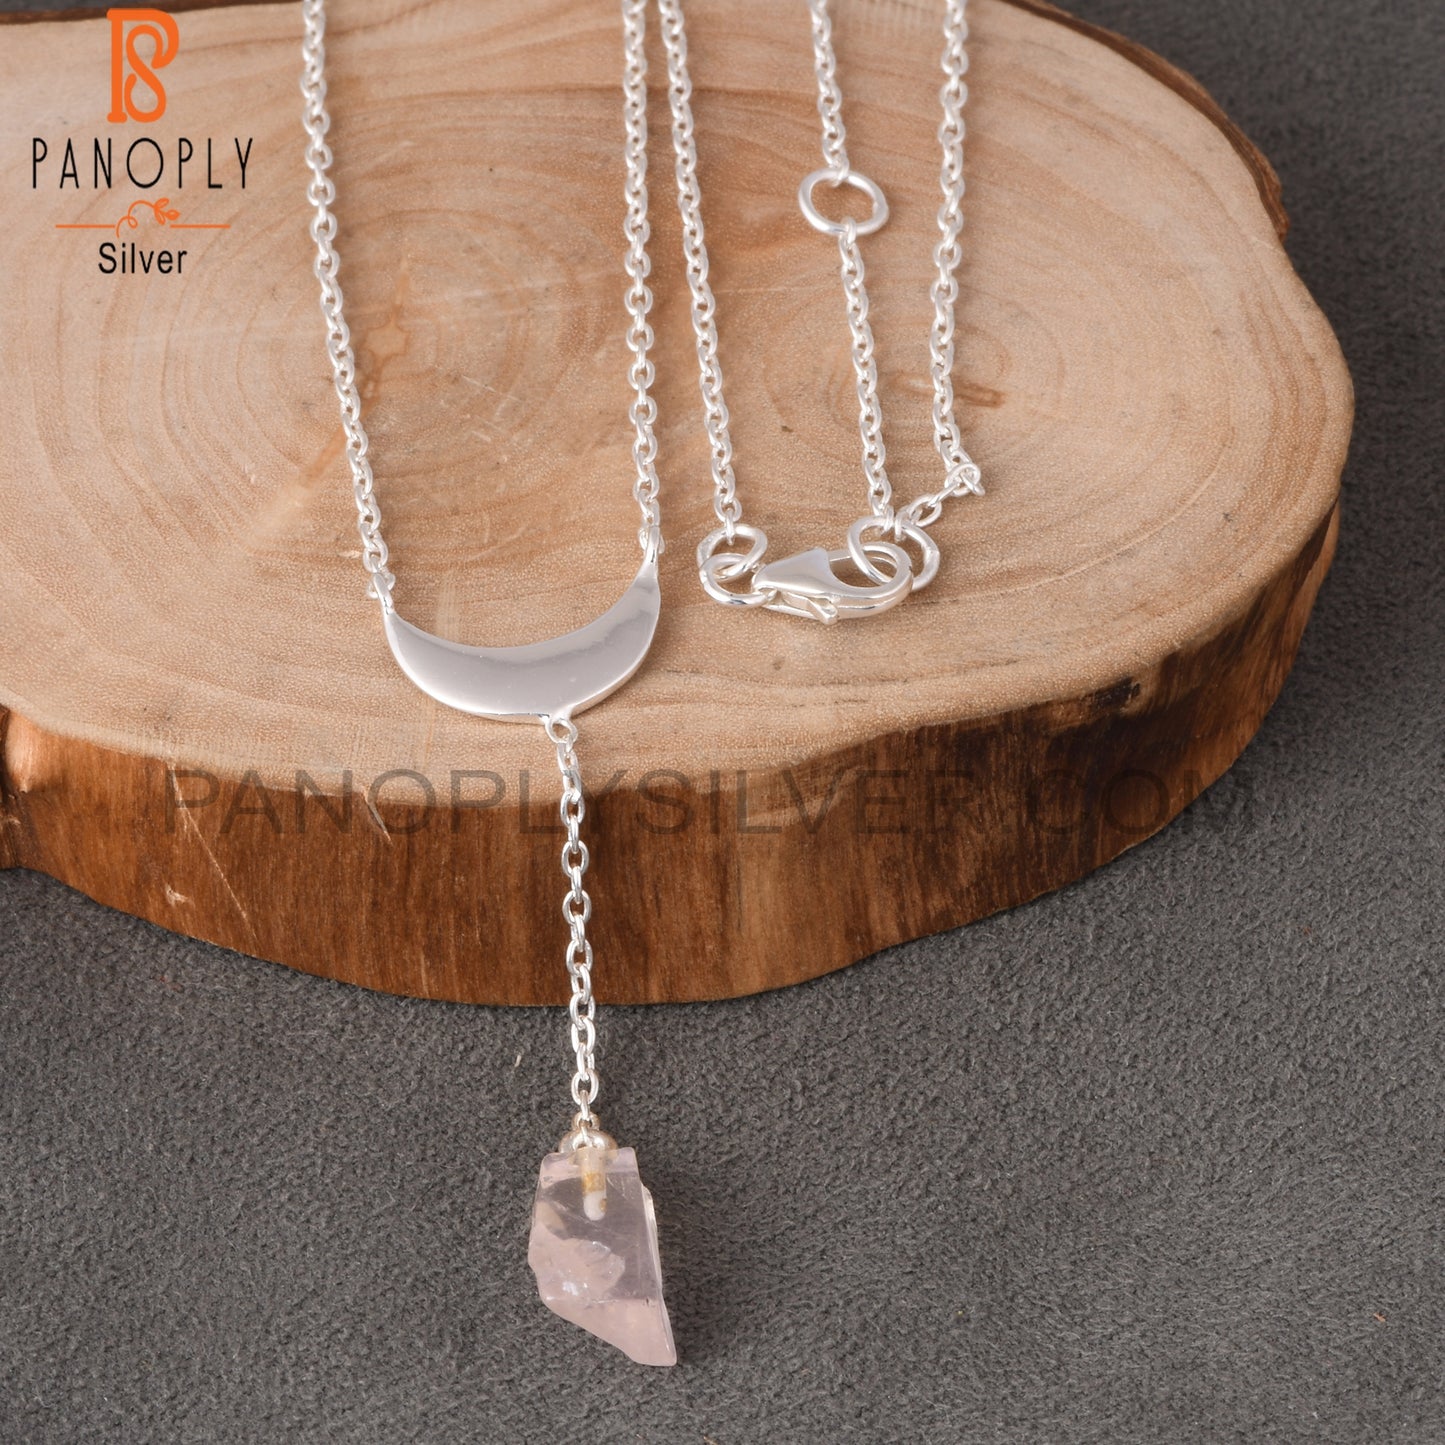 Rose Quartz Rough 925 Sterling Silver Pendant With Chain